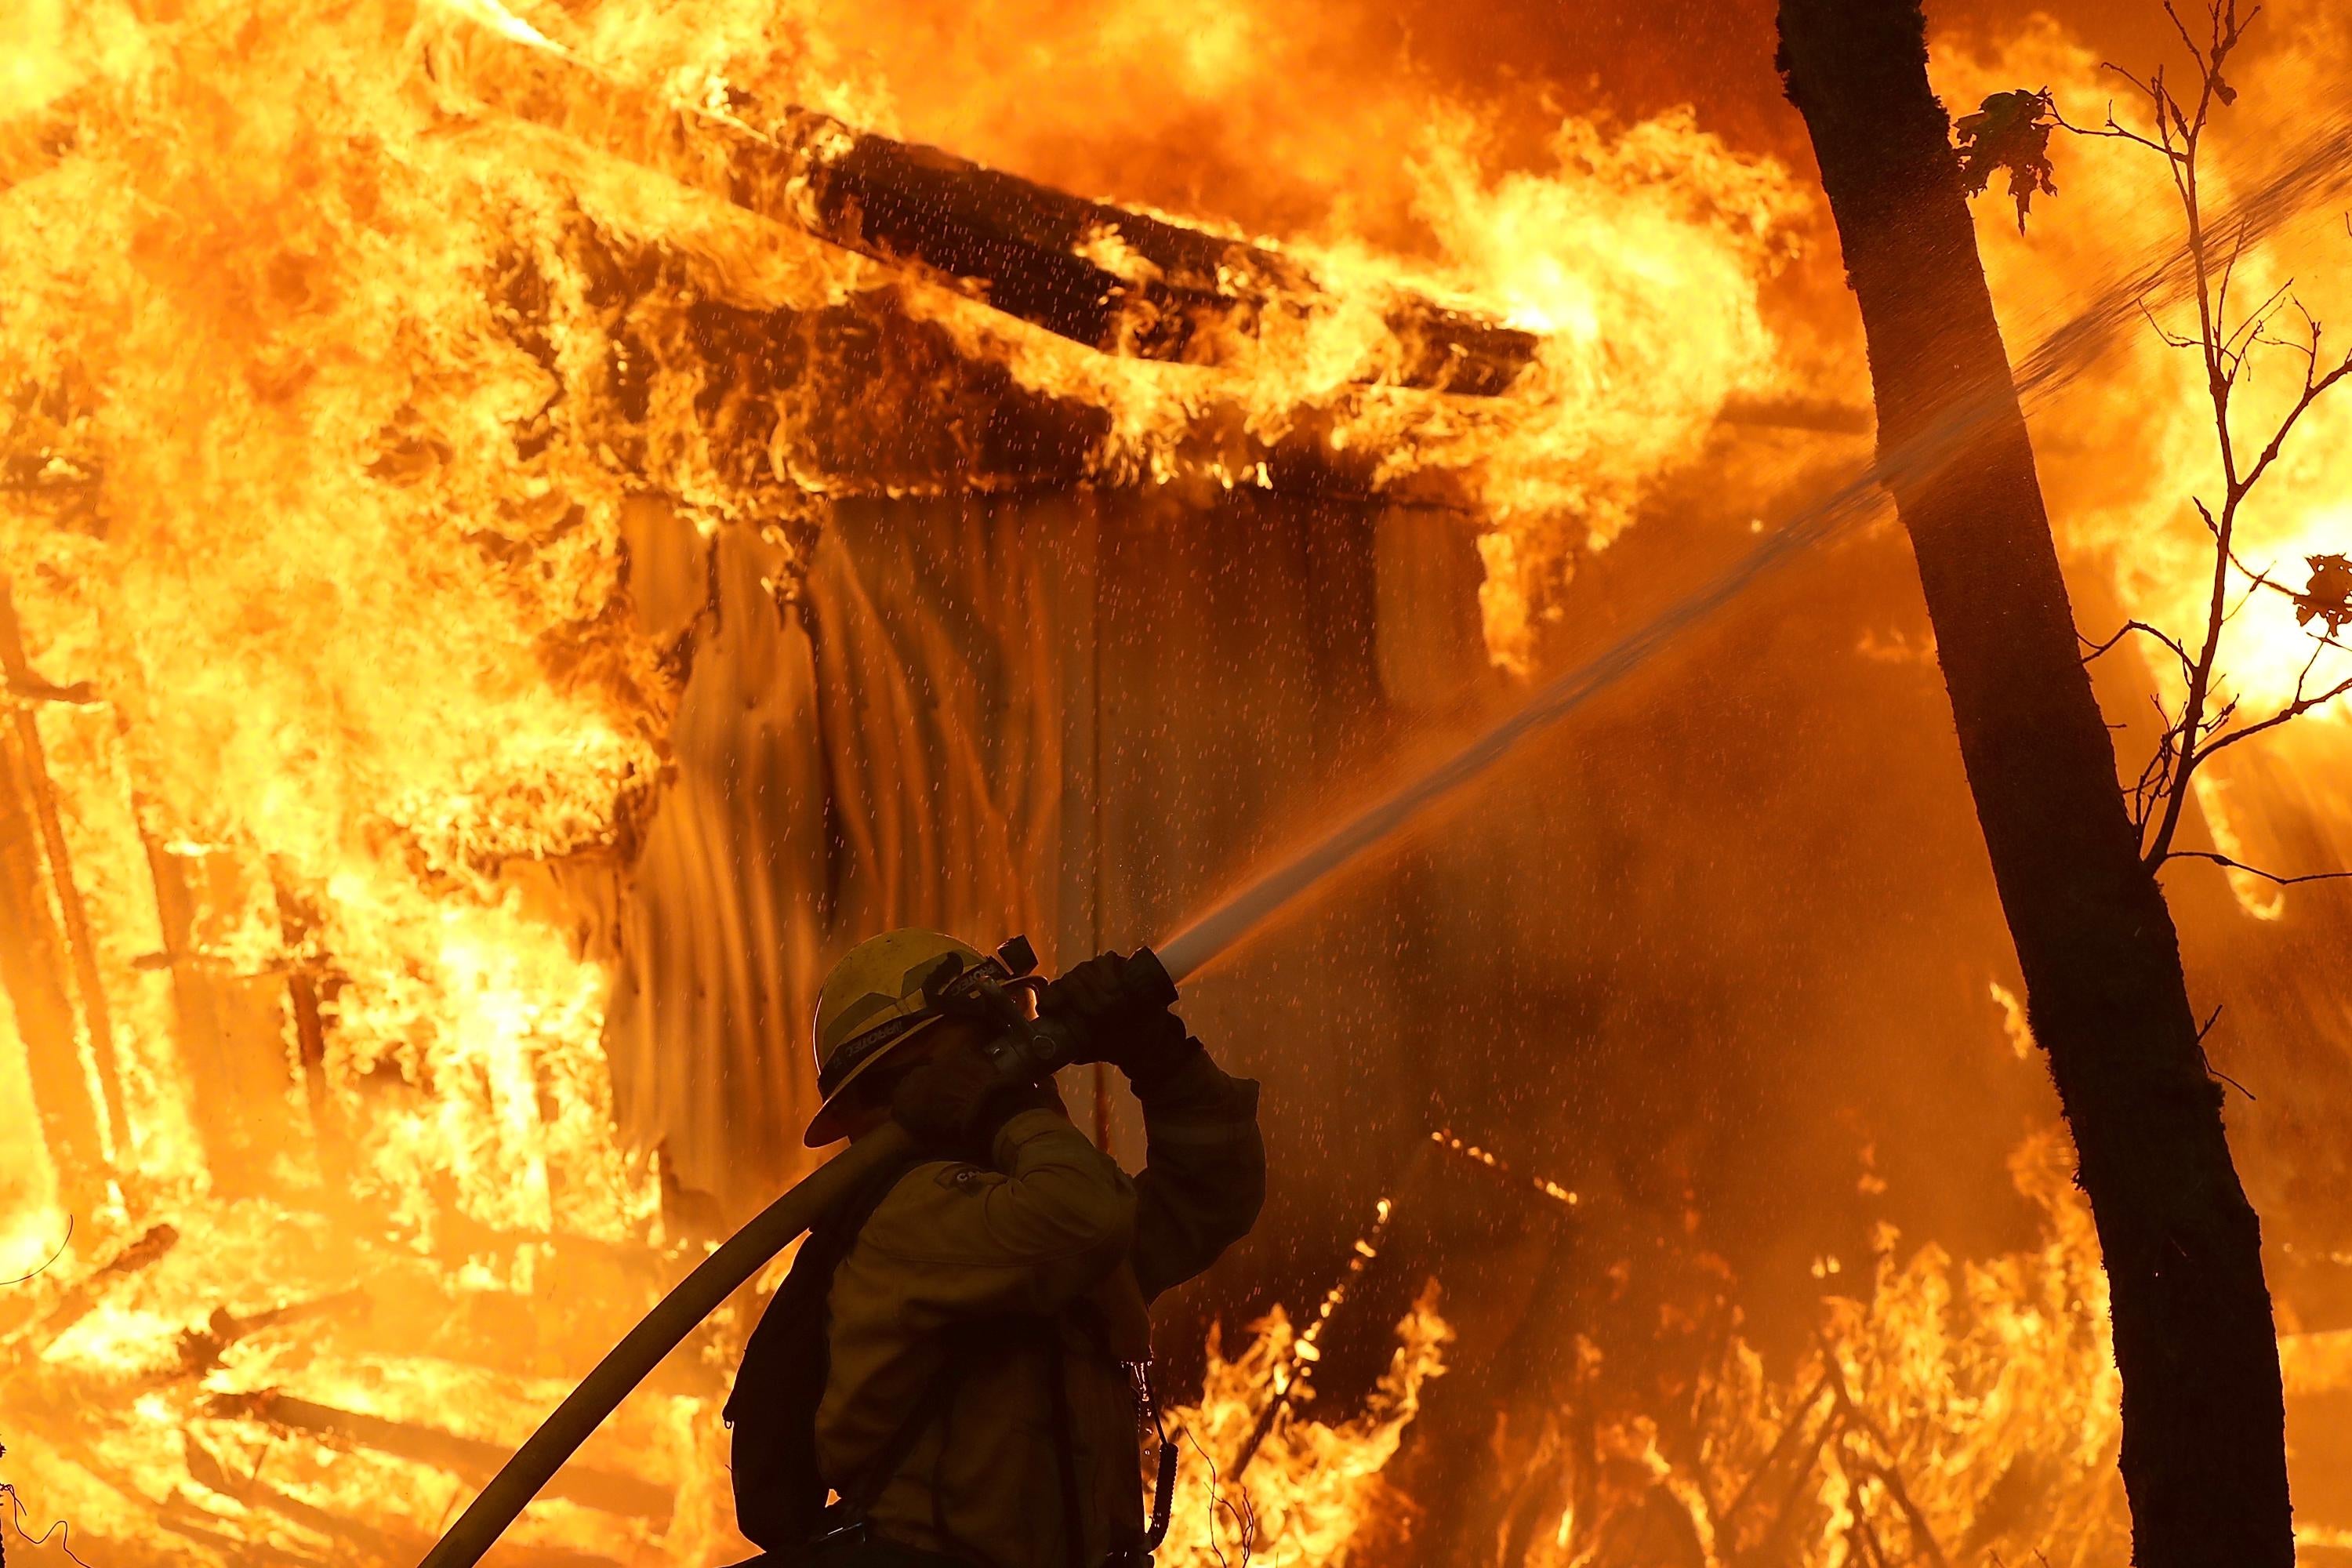 A firefighter uses a hose in the midst of a blaze.